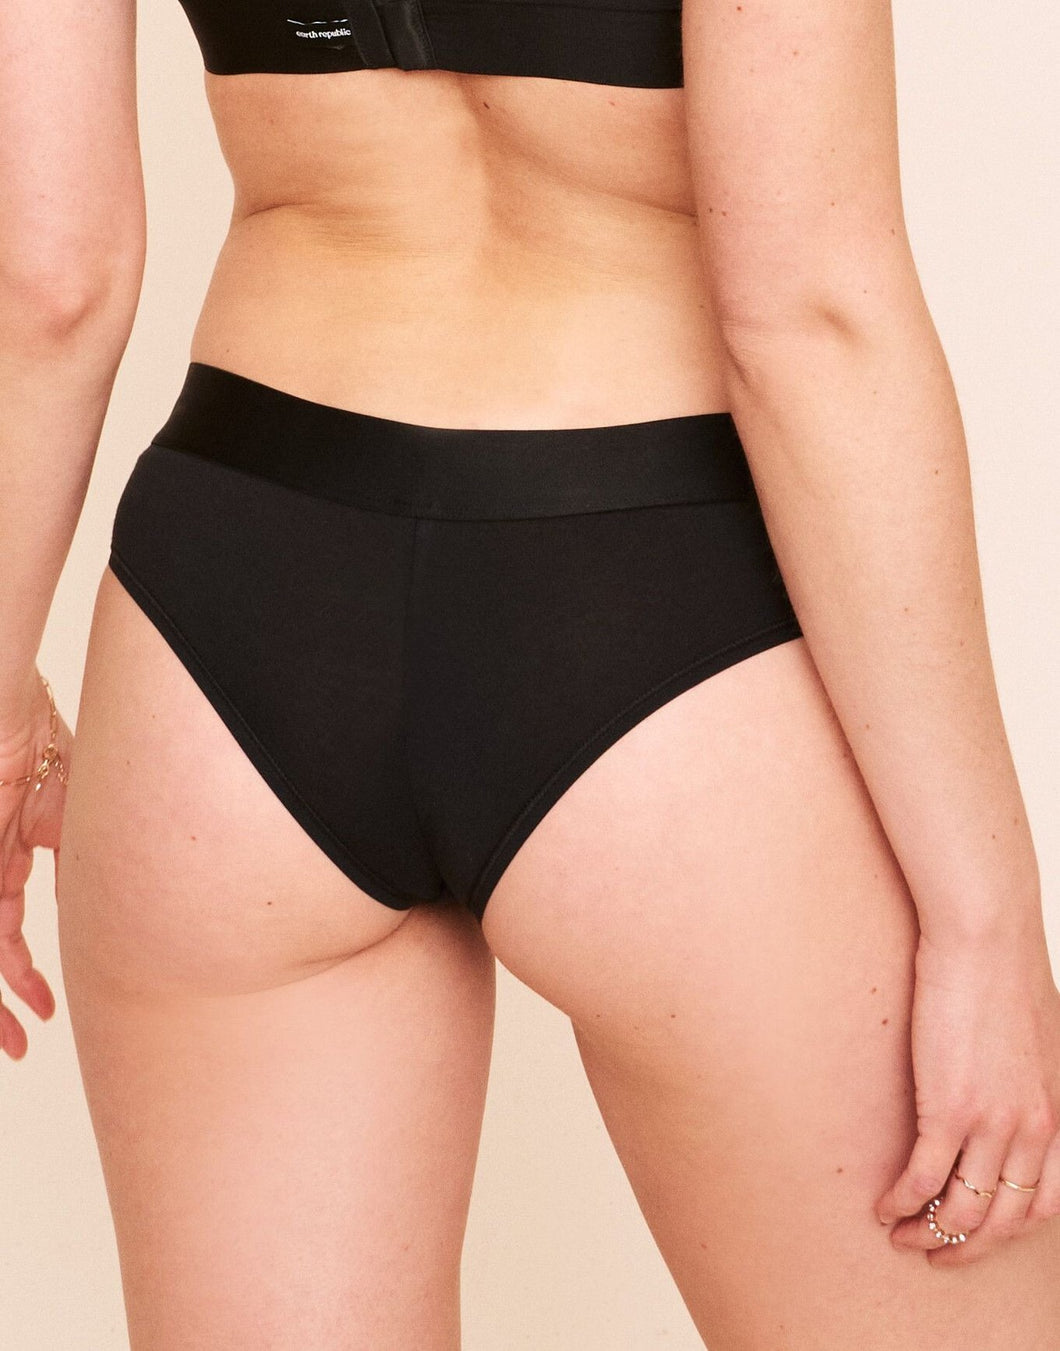 Earth Republic Logan Cotton Cotton Cheeky in color Jet Black and shape cheeky